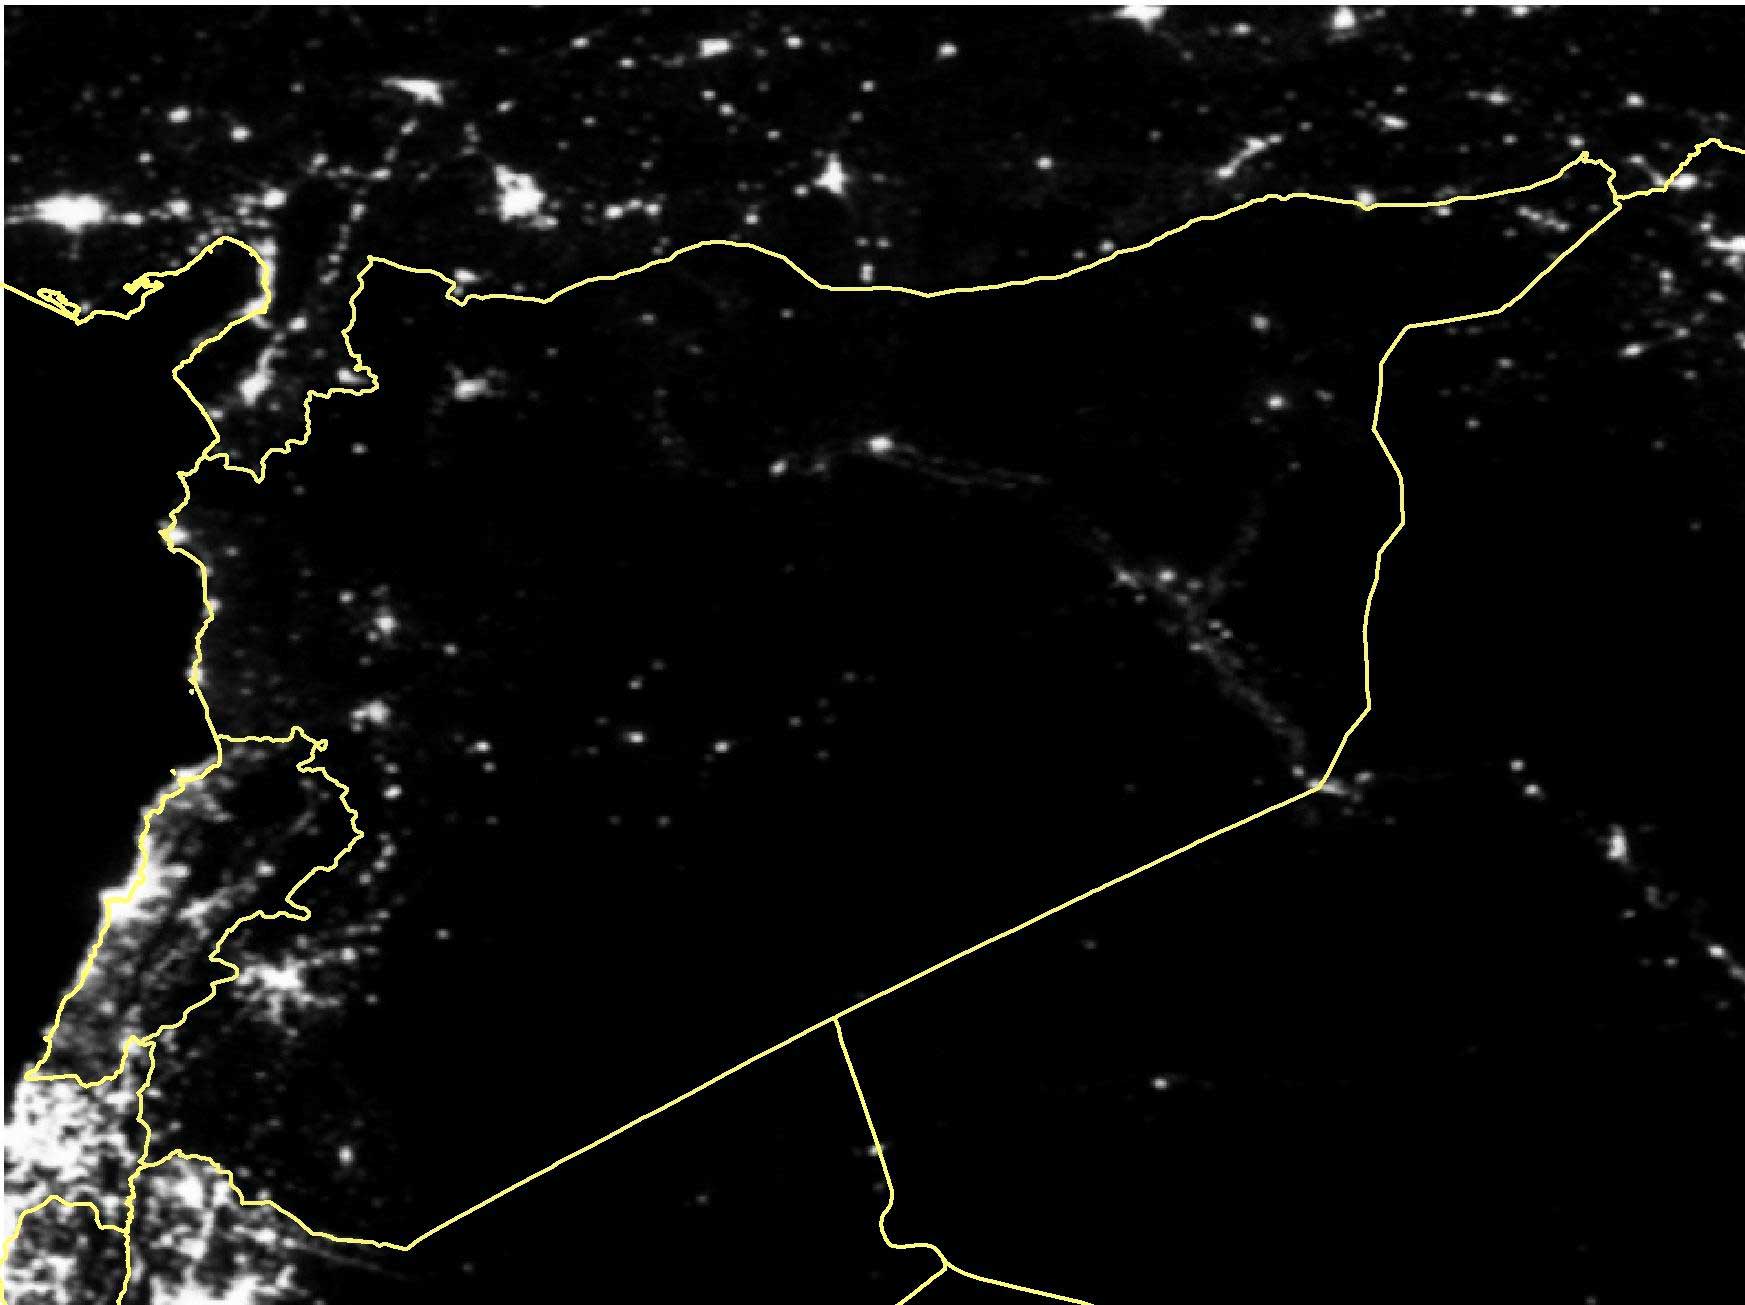 Satellite imagery of Syria in March 2014.